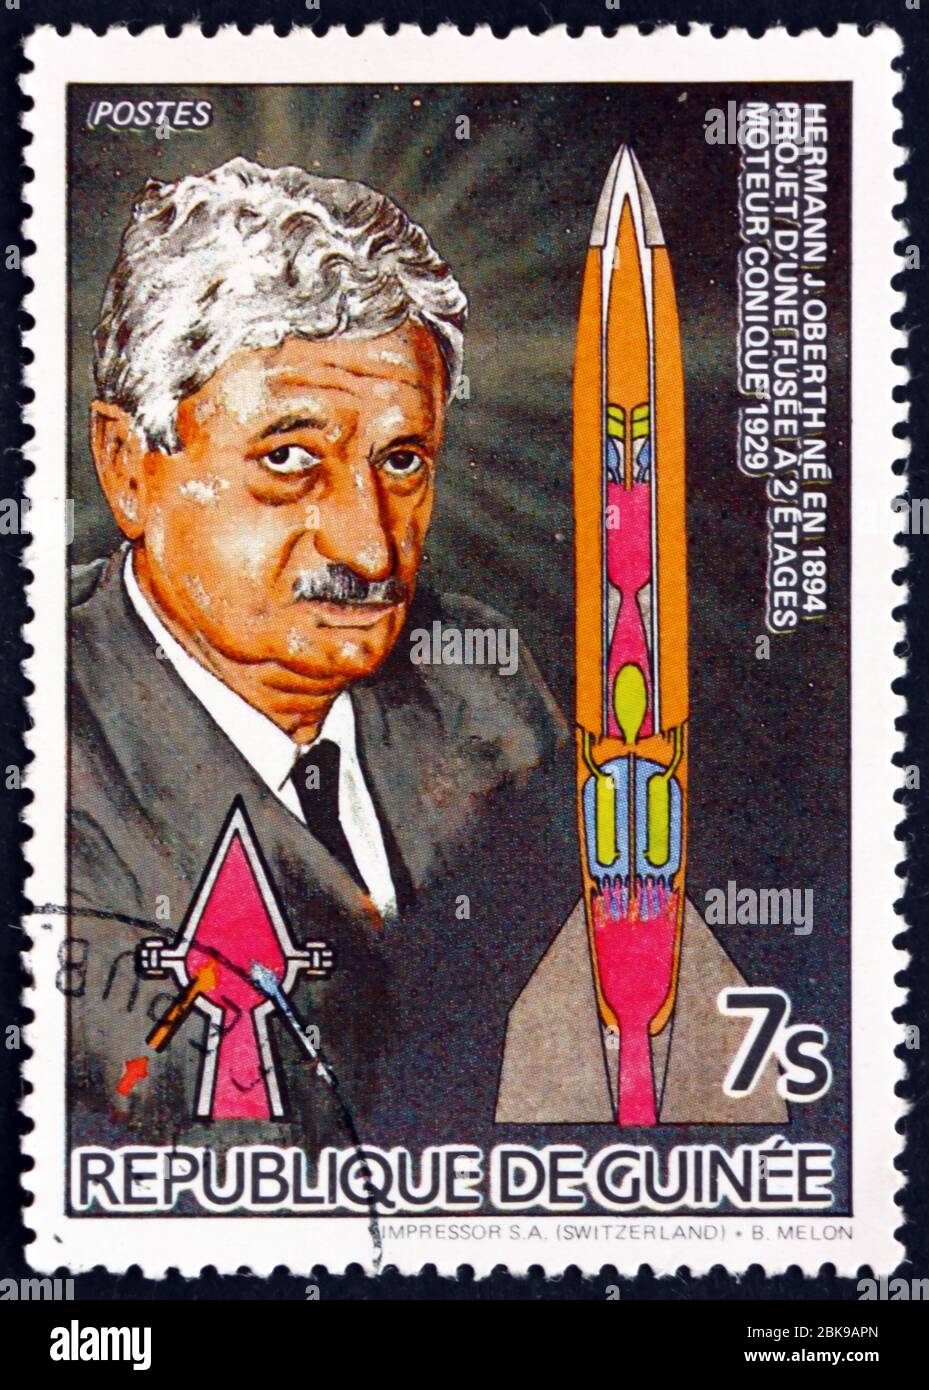 GUINEA - CIRCA 1985: a stamp printed in Guinea shows Scientist Hermann J. Oberth, German Physicist and Engineer, and Two-stage Rocket, circa 1985 Stock Photo